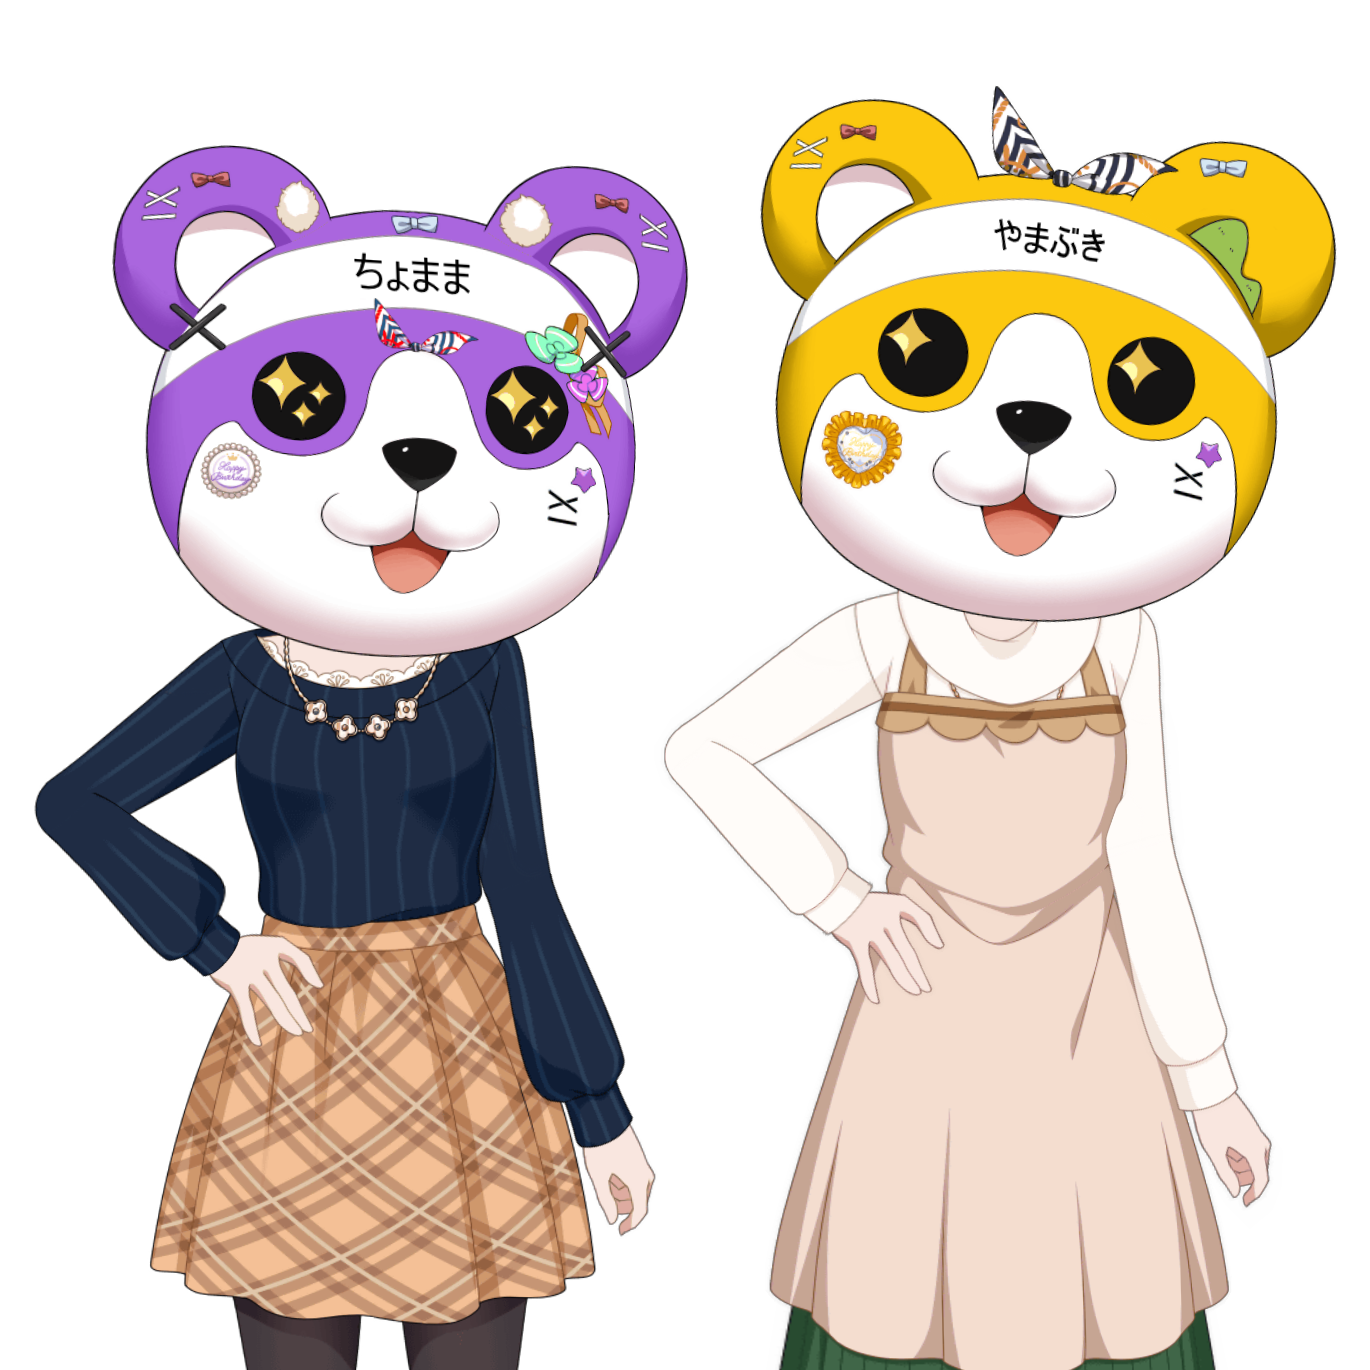   Happy Thanksgiving in USA!  

I made Saaya and Arisa Michelle, although I was about roleplay...